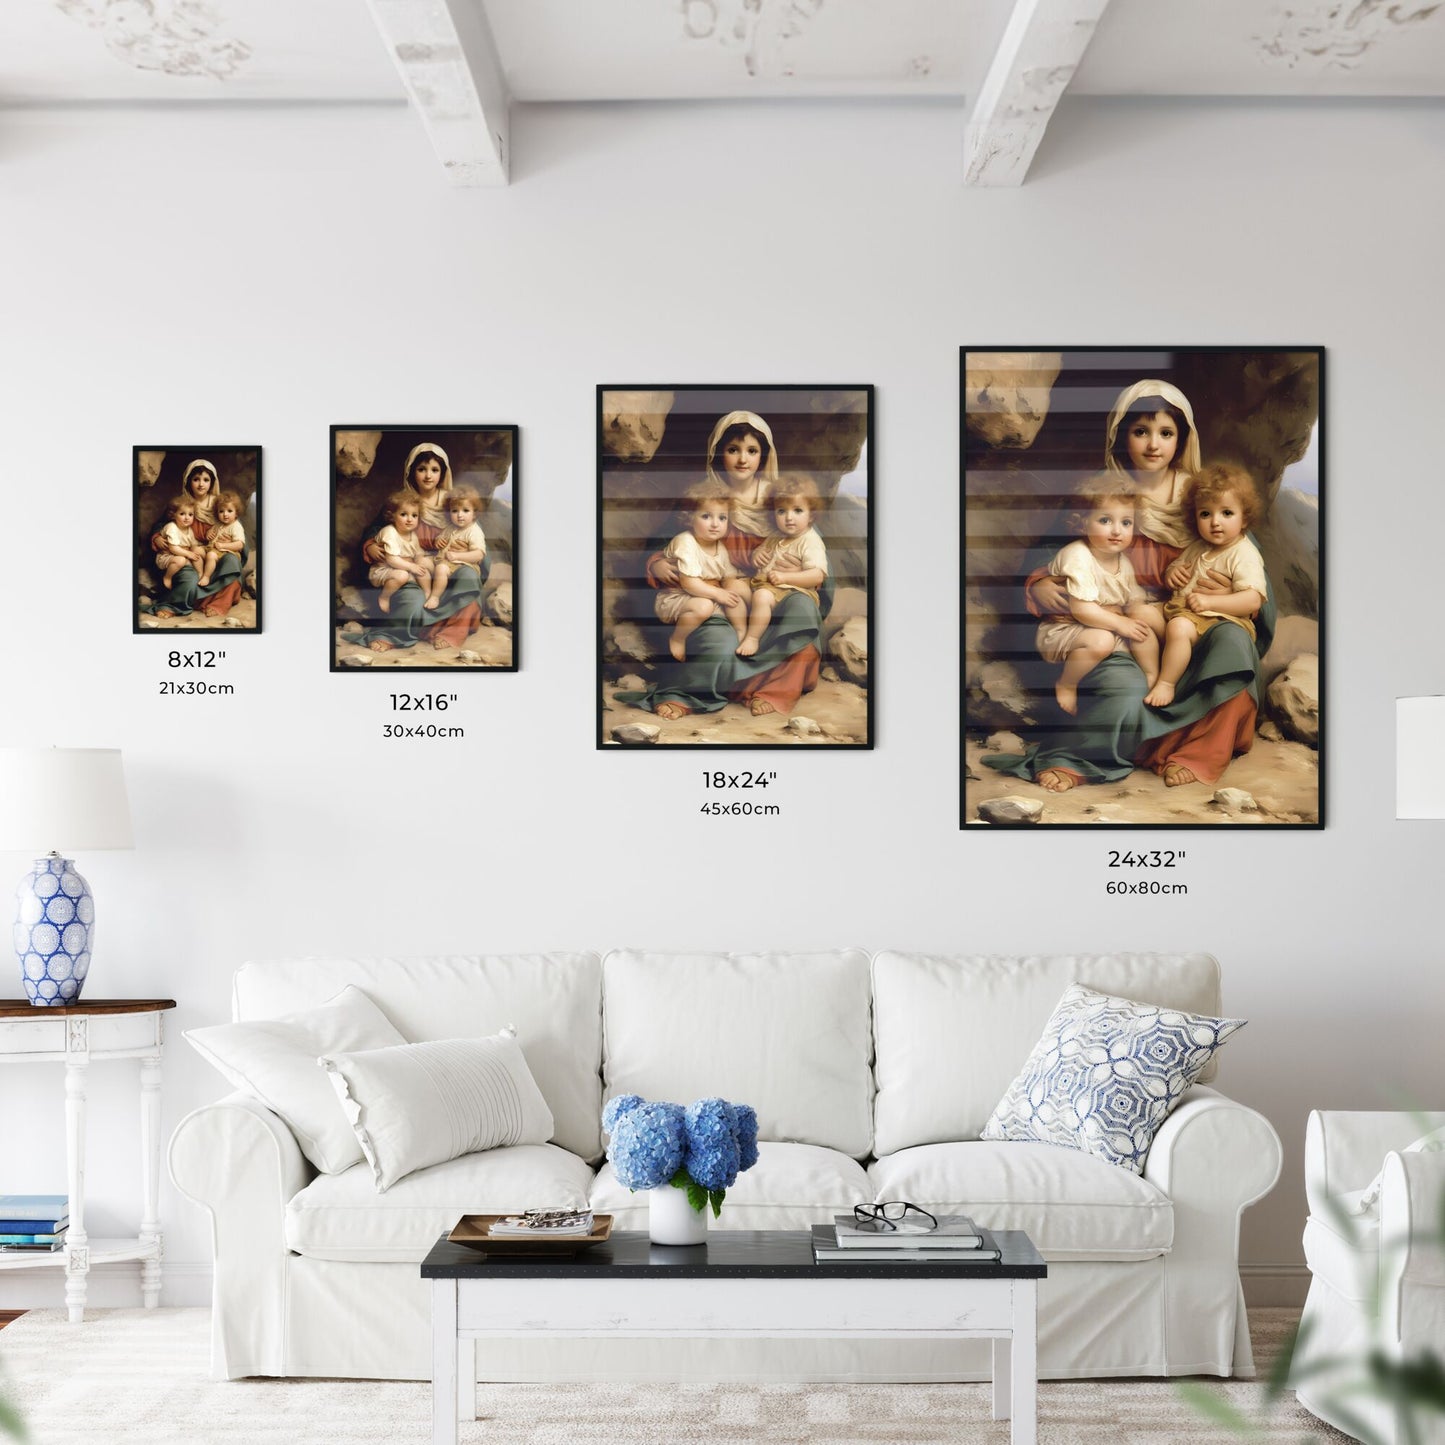 Holy Mary, Mother of God pray for us sinners now and at the hour of our death, amen - Art print of a painting of a woman holding two children Default Title